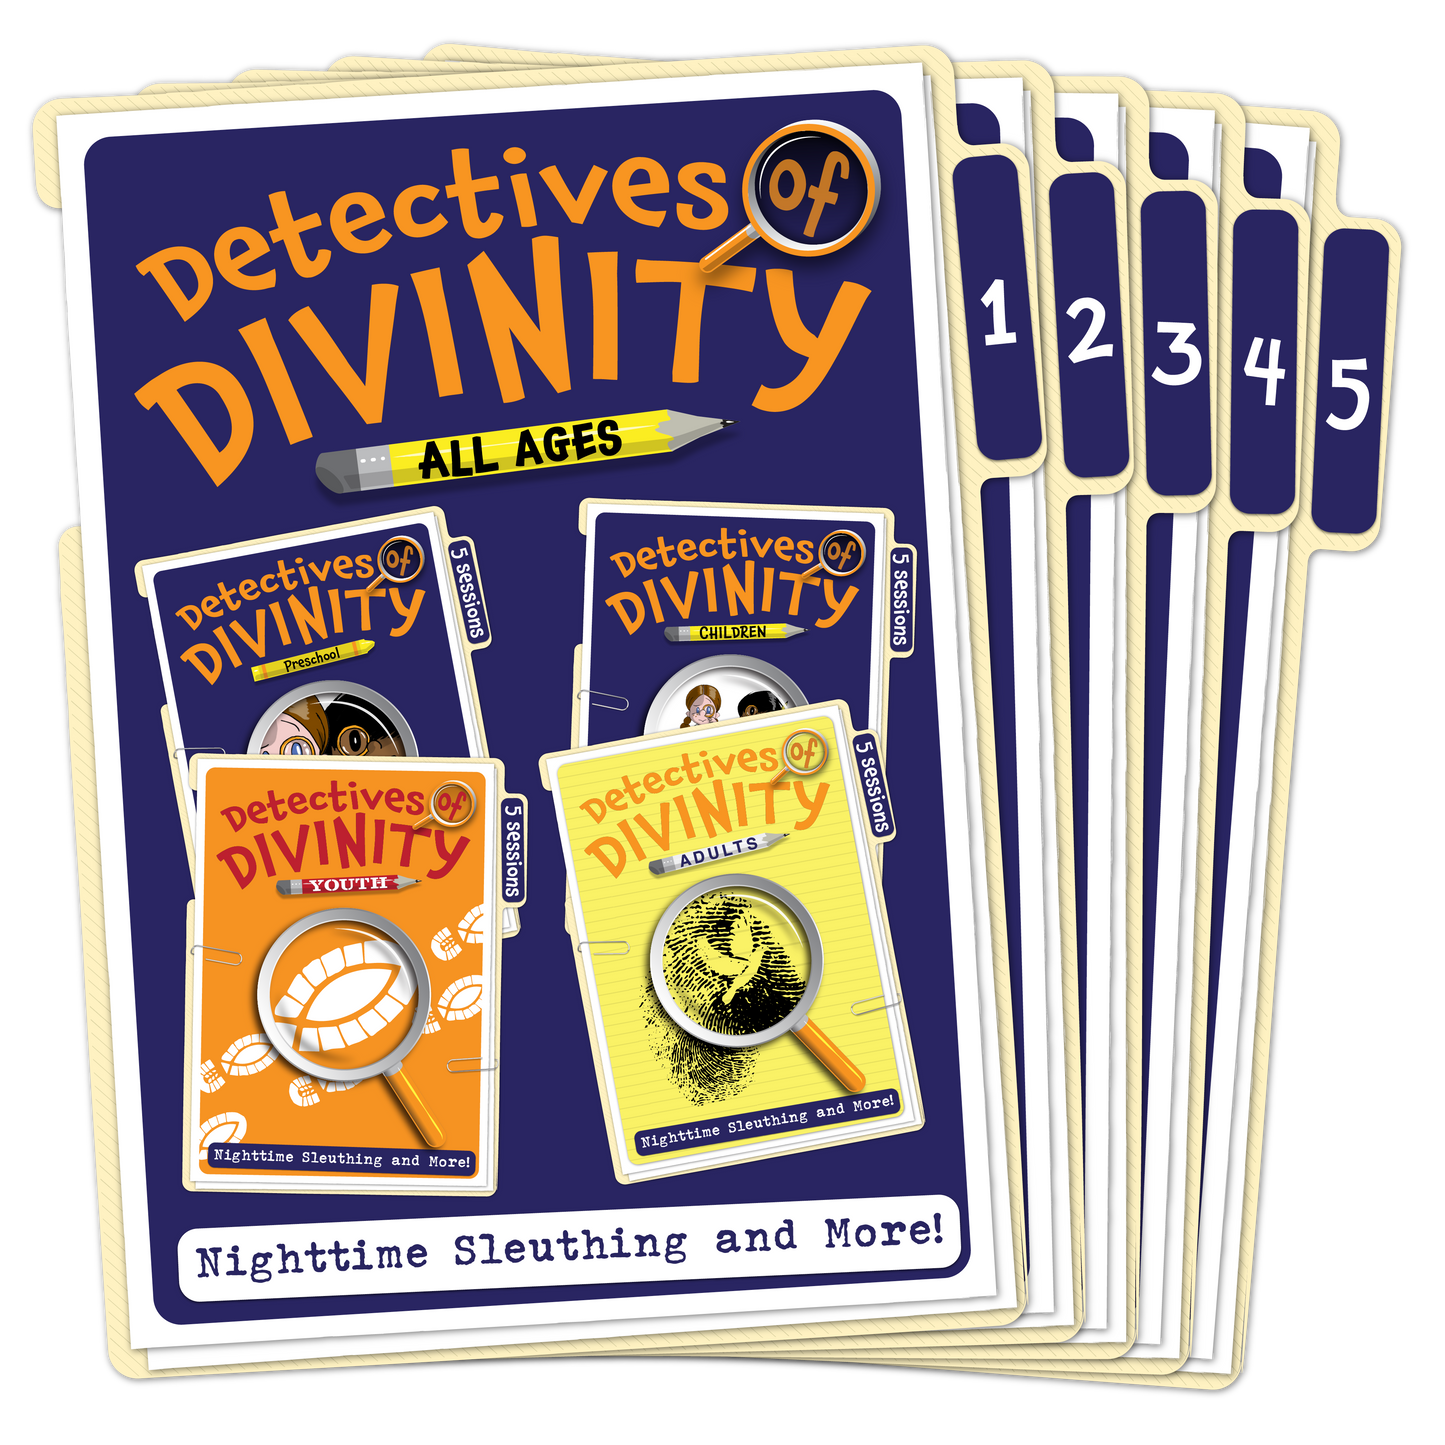 Detectives of Divinity 20 Lessons (5 for each age level) :: Nighttime Sleuthing & More!